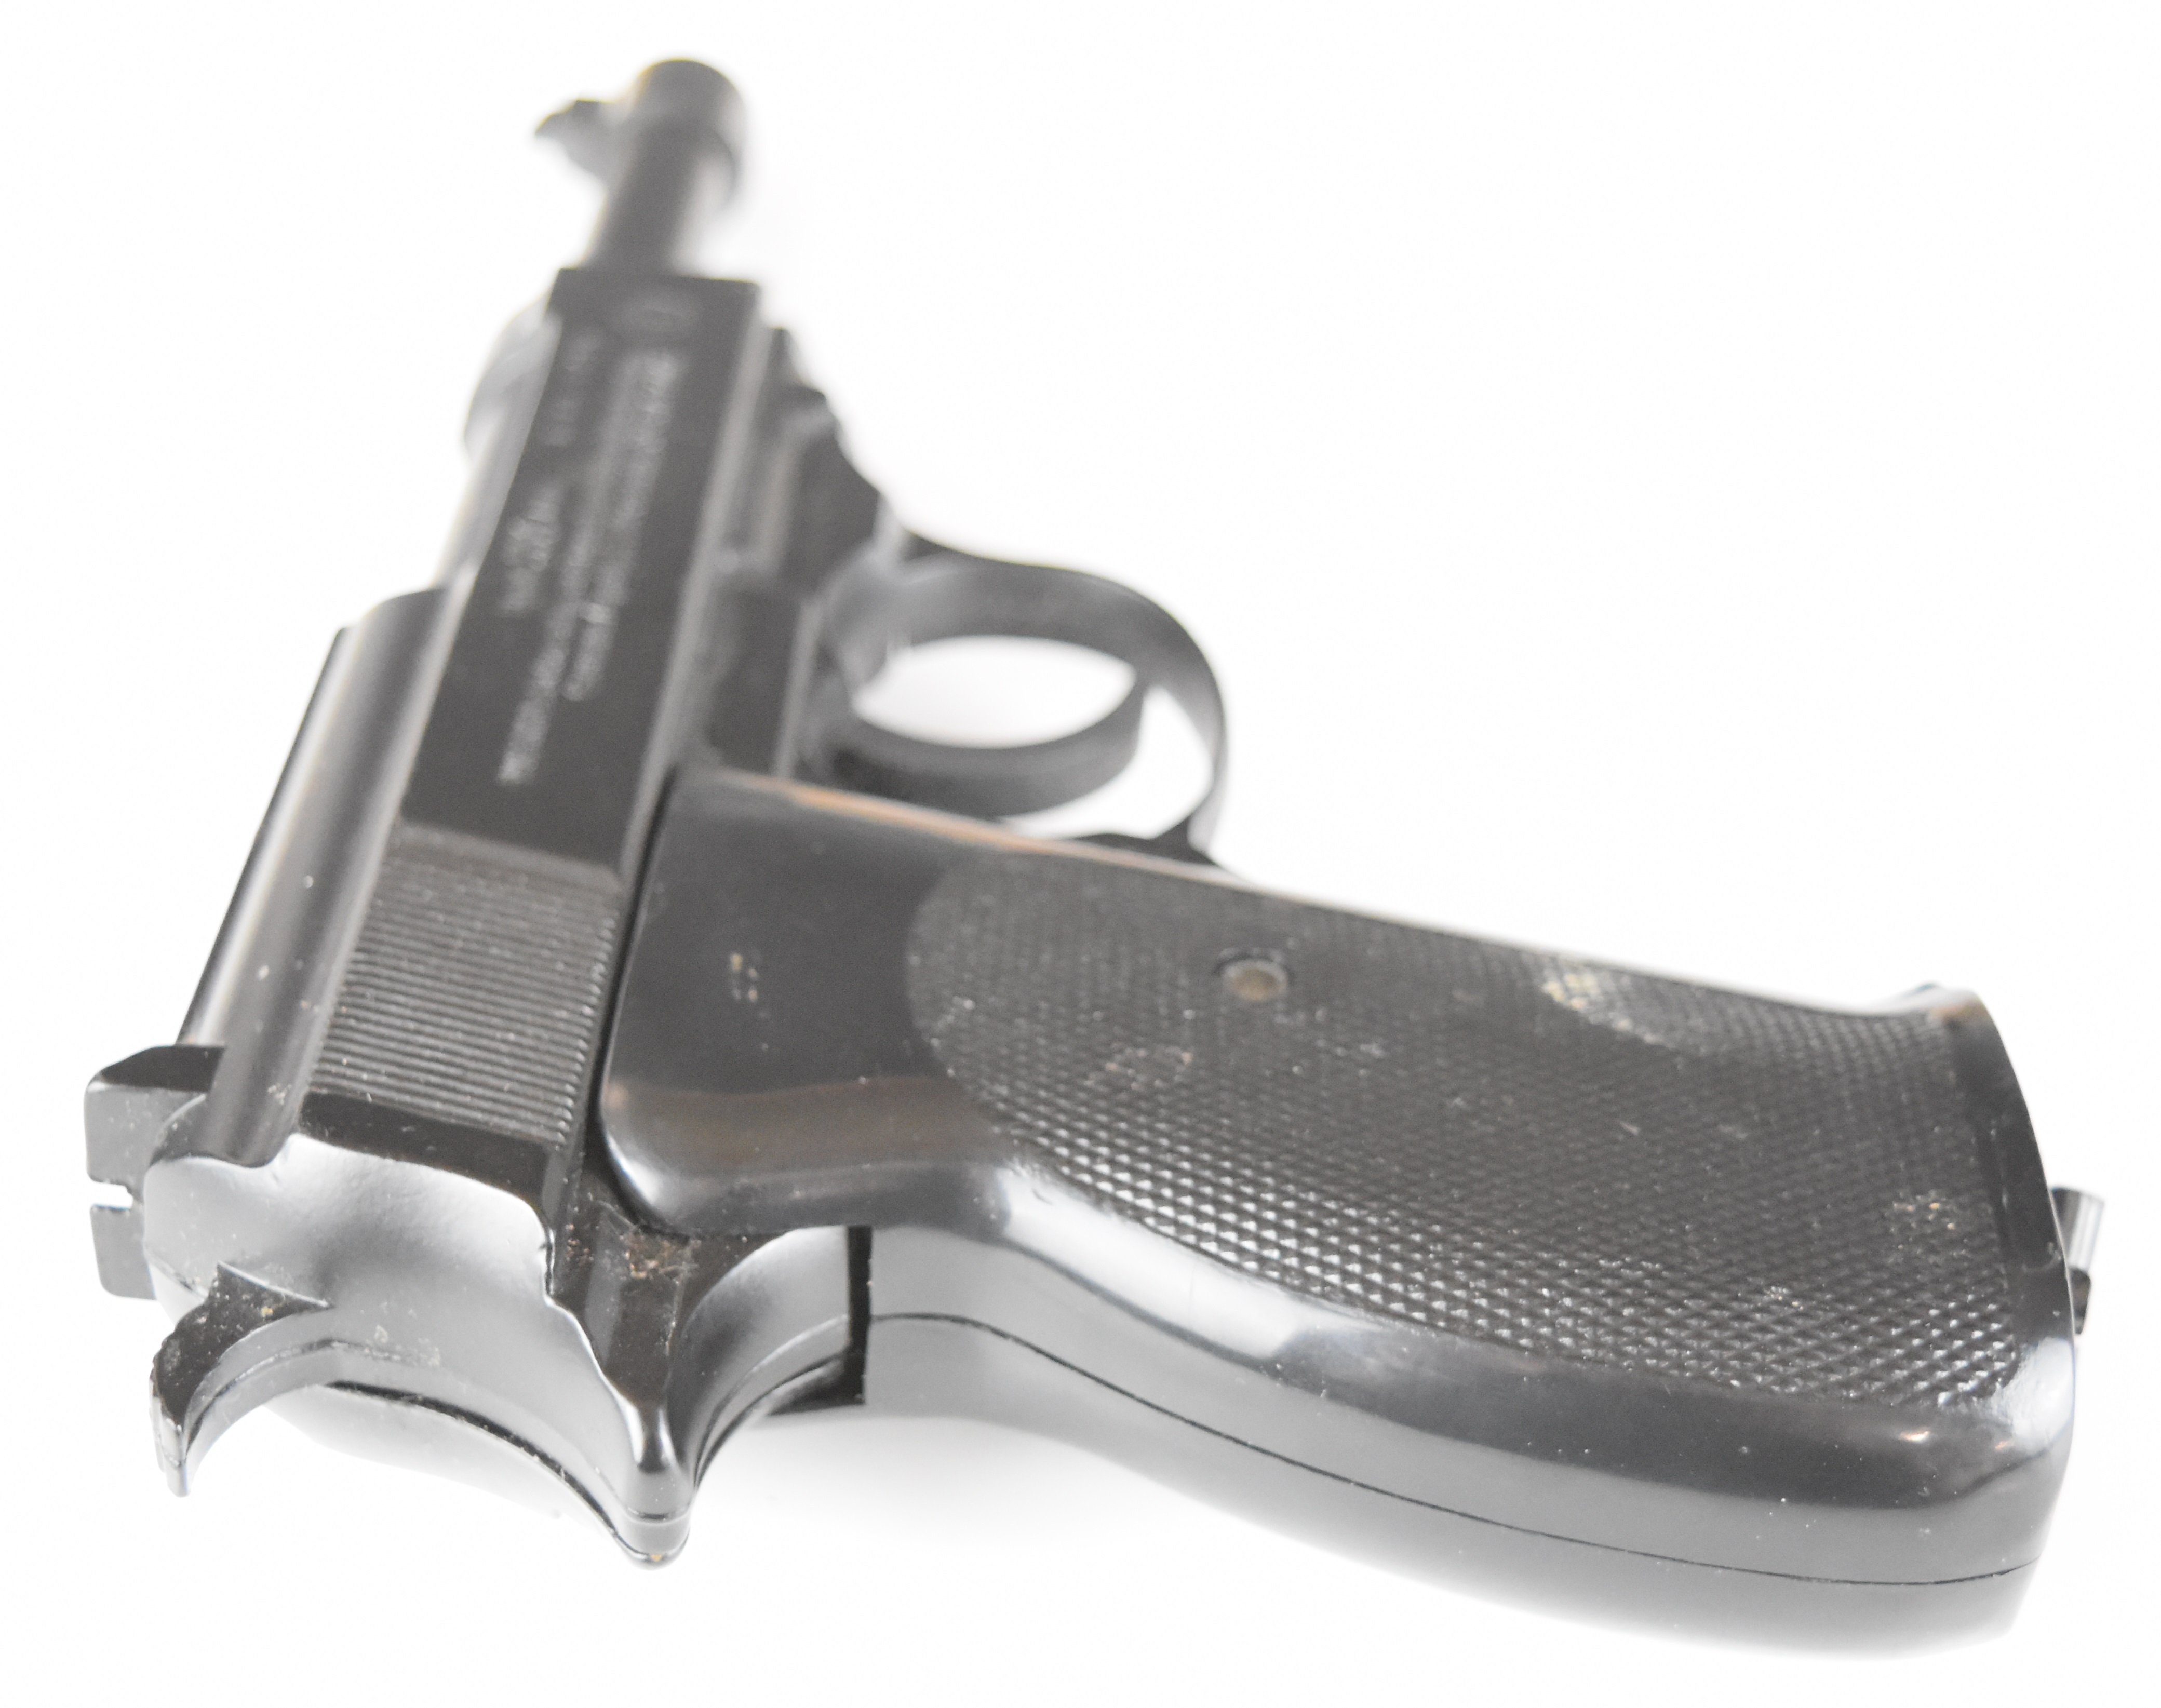 Two CO2 air pistols Daisy Model 2003 35-shot repeater .177 with chequered composite grips and - Image 3 of 14